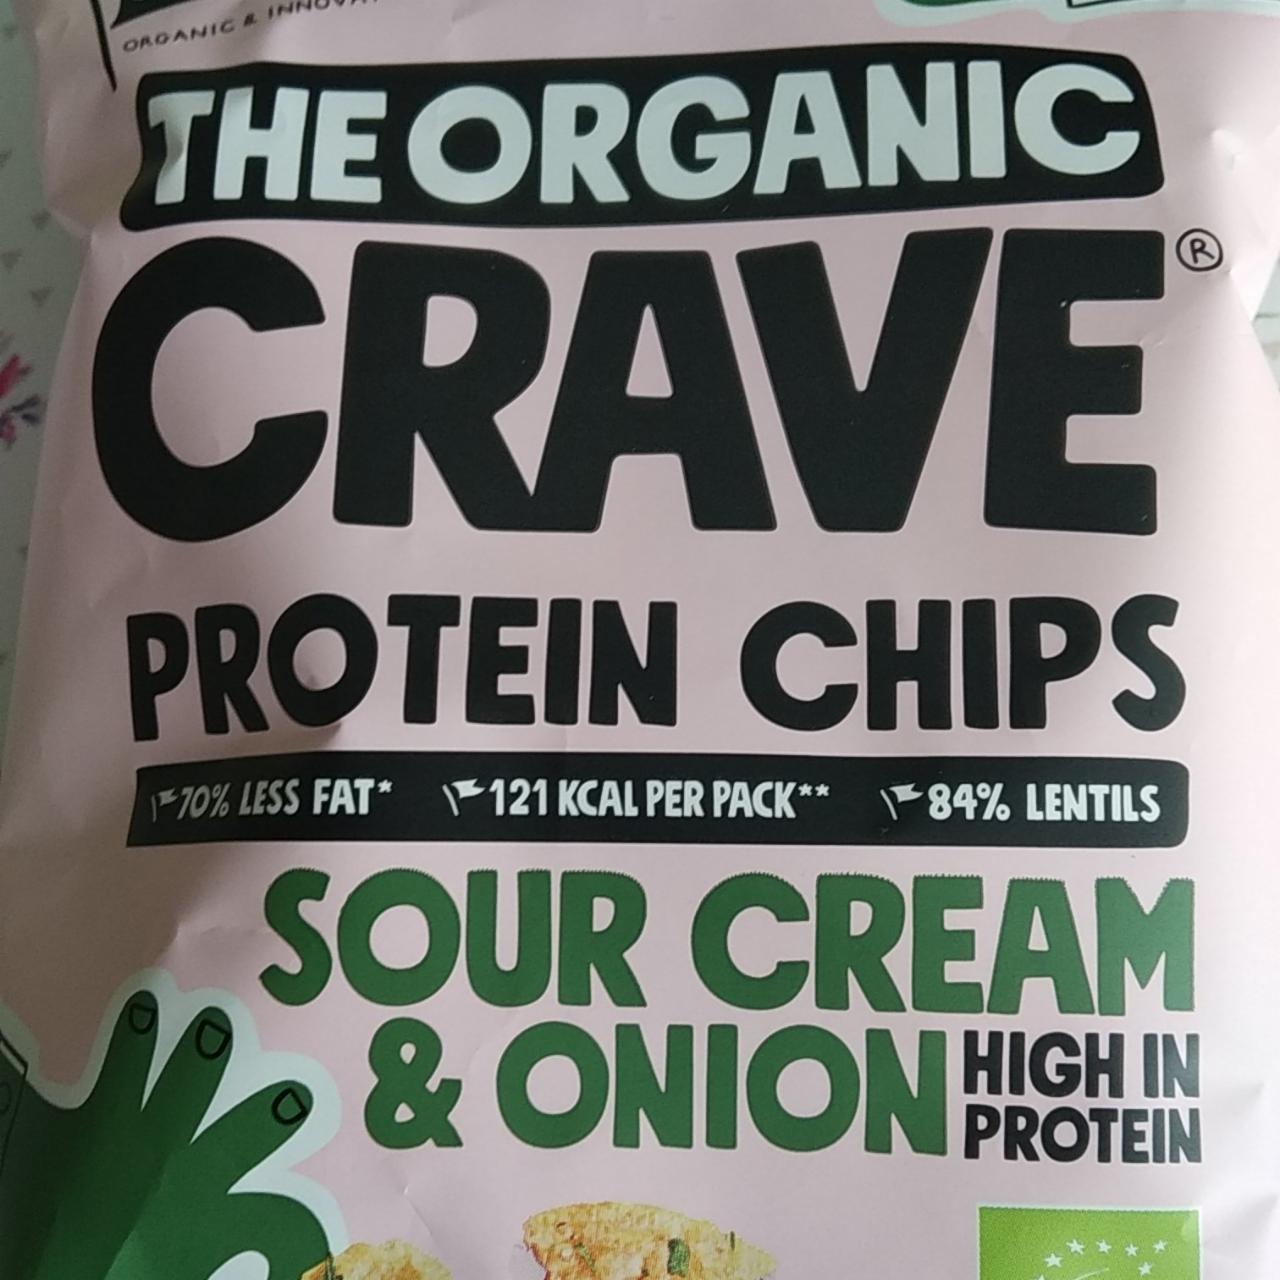 Fotografie - The organic Crave protein chips Sour cream & Onion Crave More